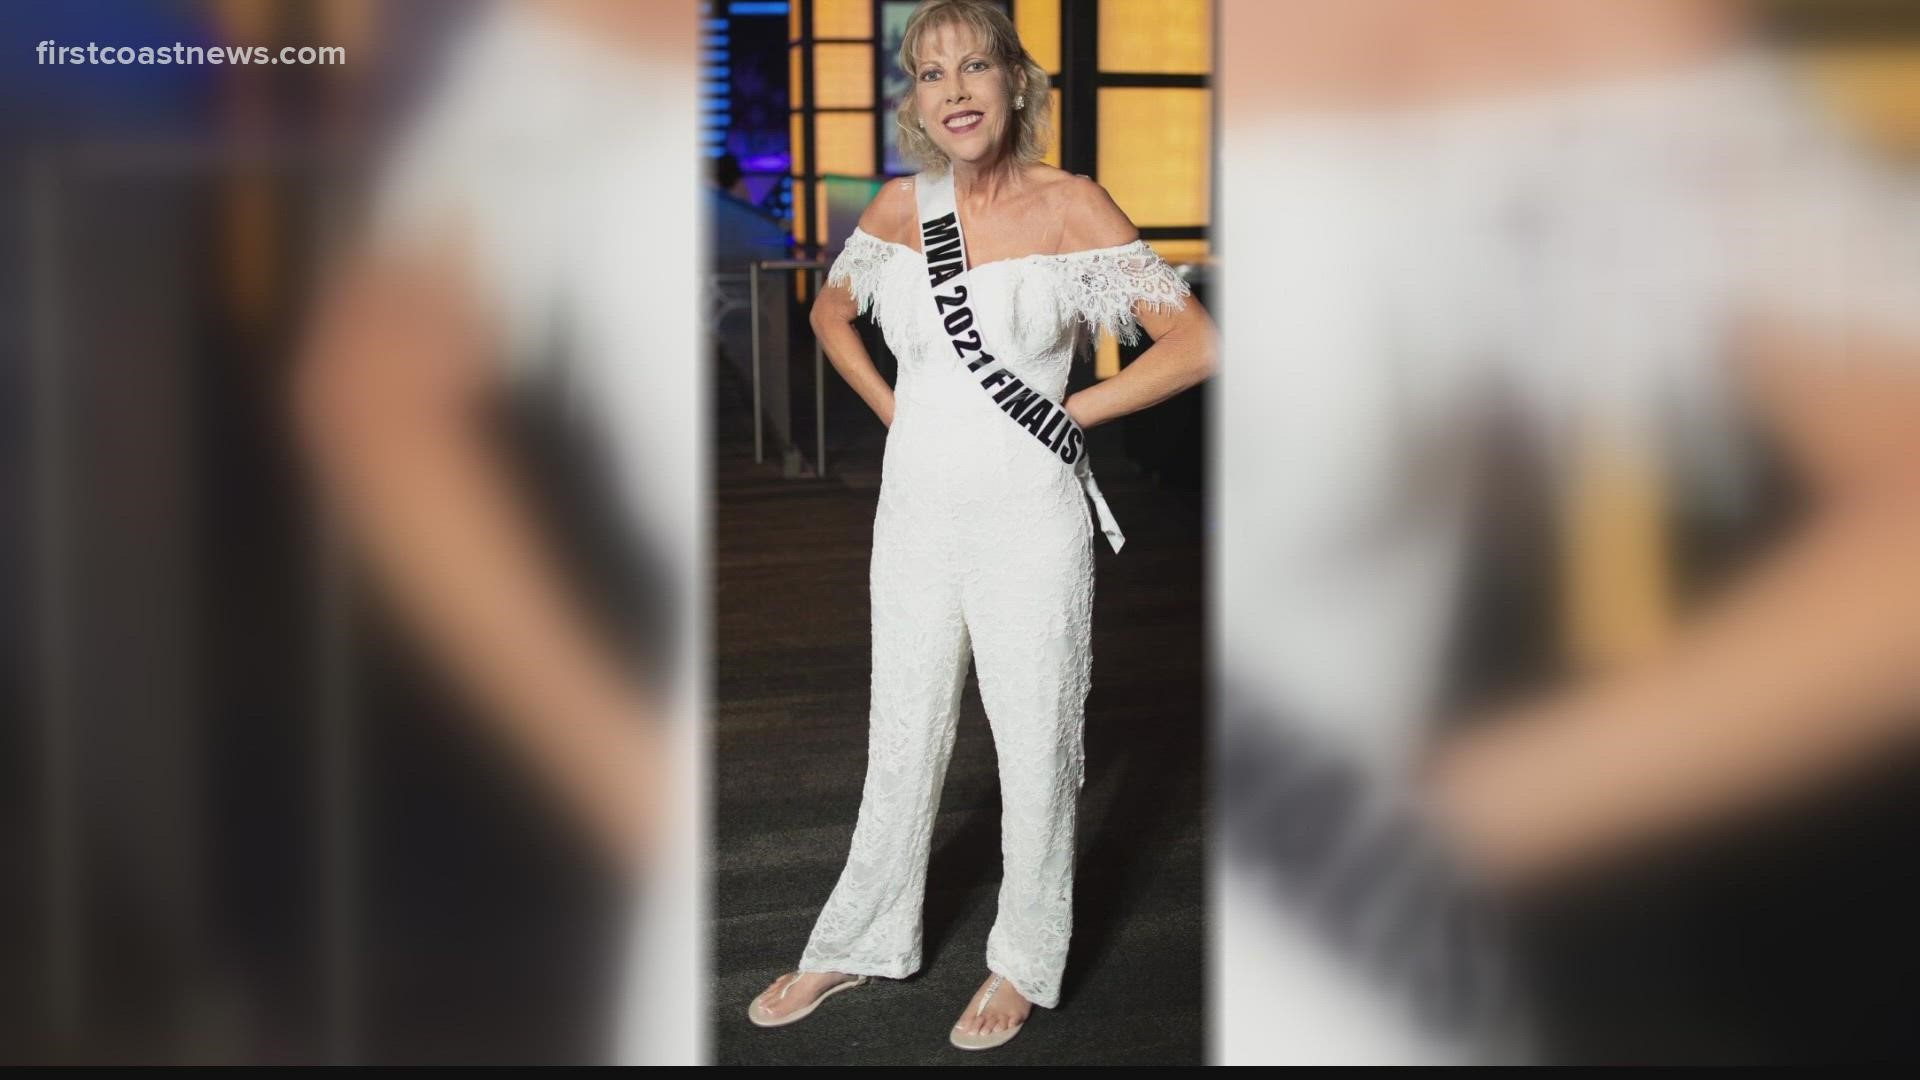 The Ms. Veteran America competition is described as an event that showcases the woman beyond the uniform.